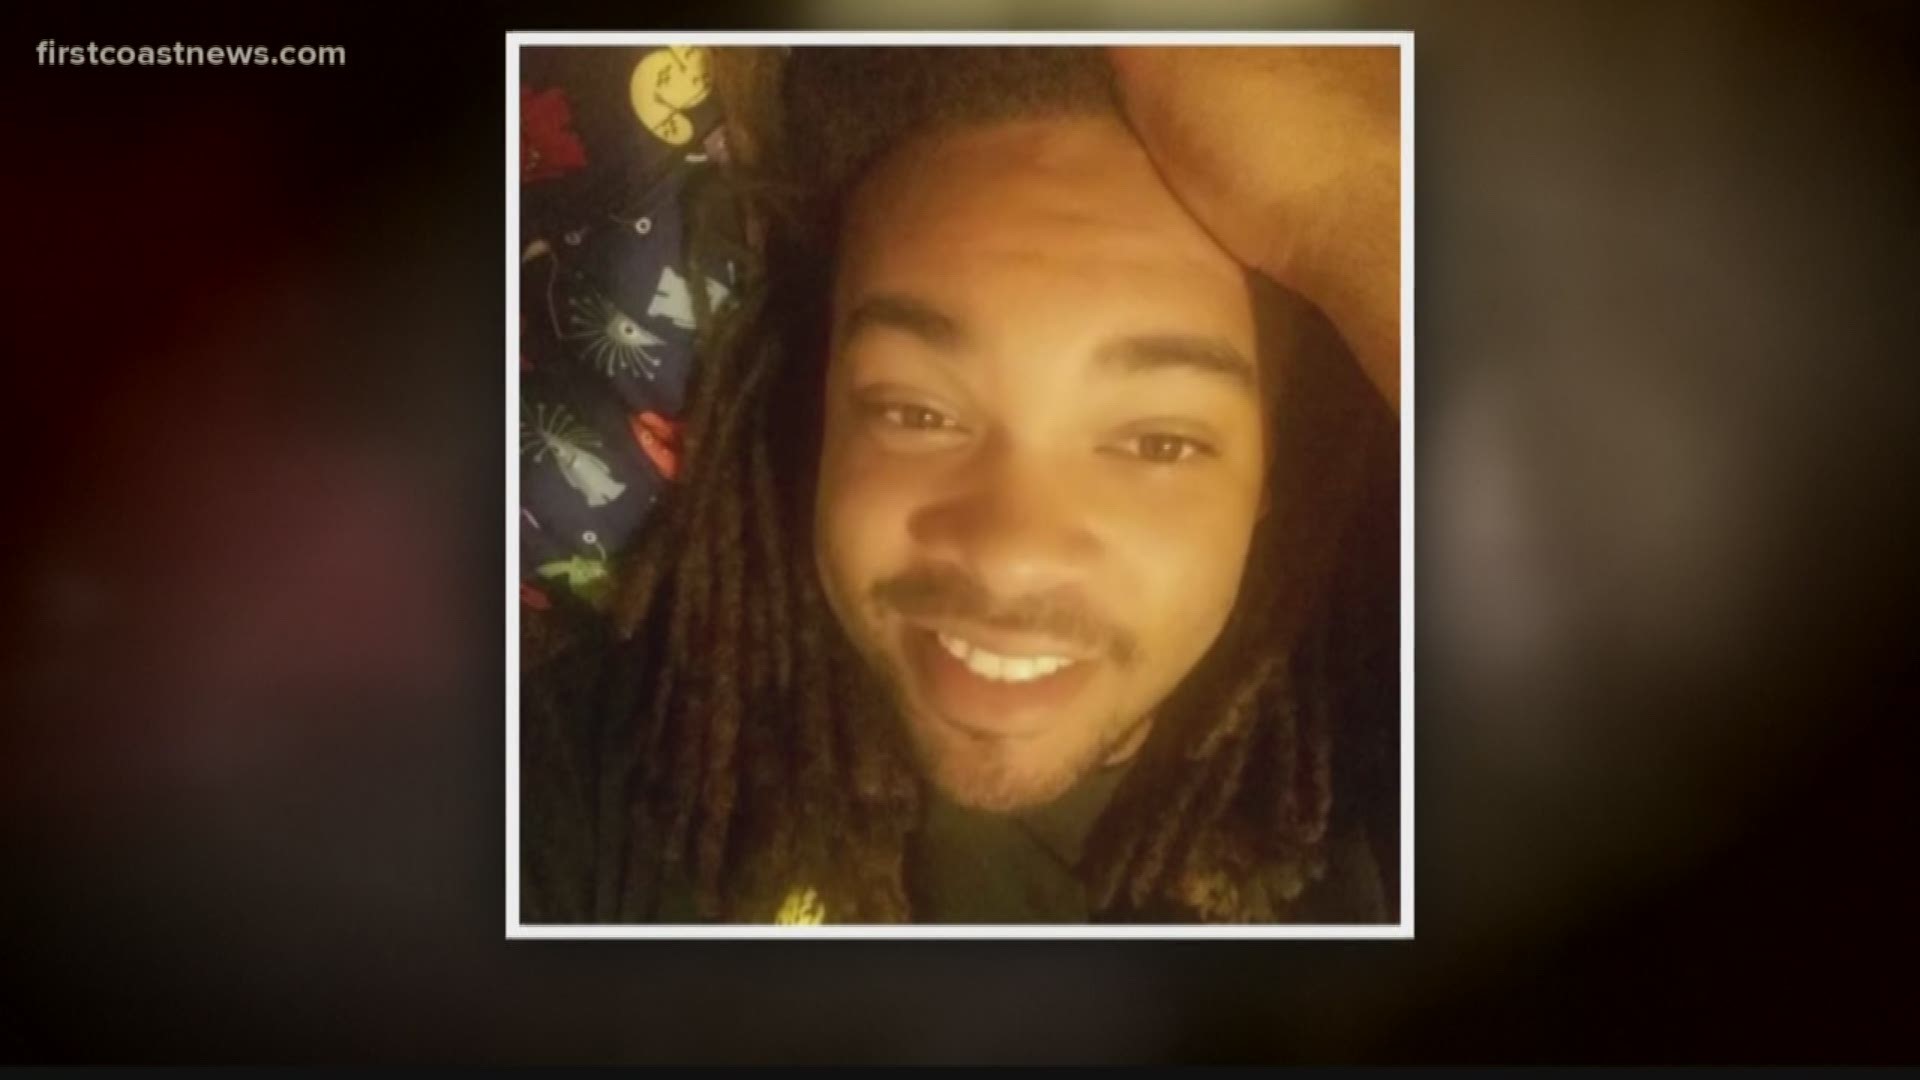 A 22-year-old man was shot and killed in Glynn County and police need help finding the suspect.